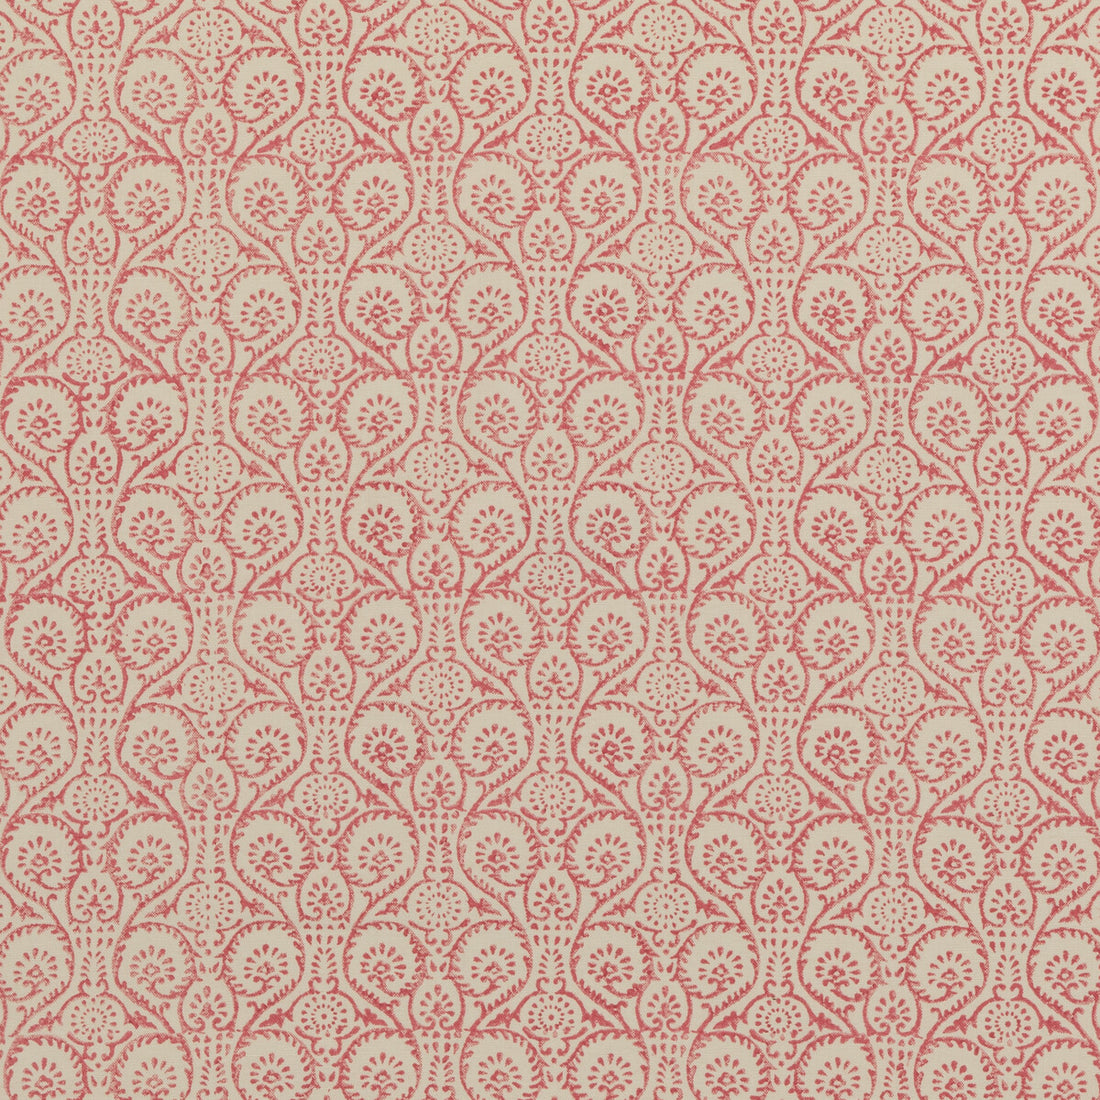 Pollen Trail fabric in fuchsia color - pattern PP50481.6.0 - by Baker Lifestyle in the Block Party collection